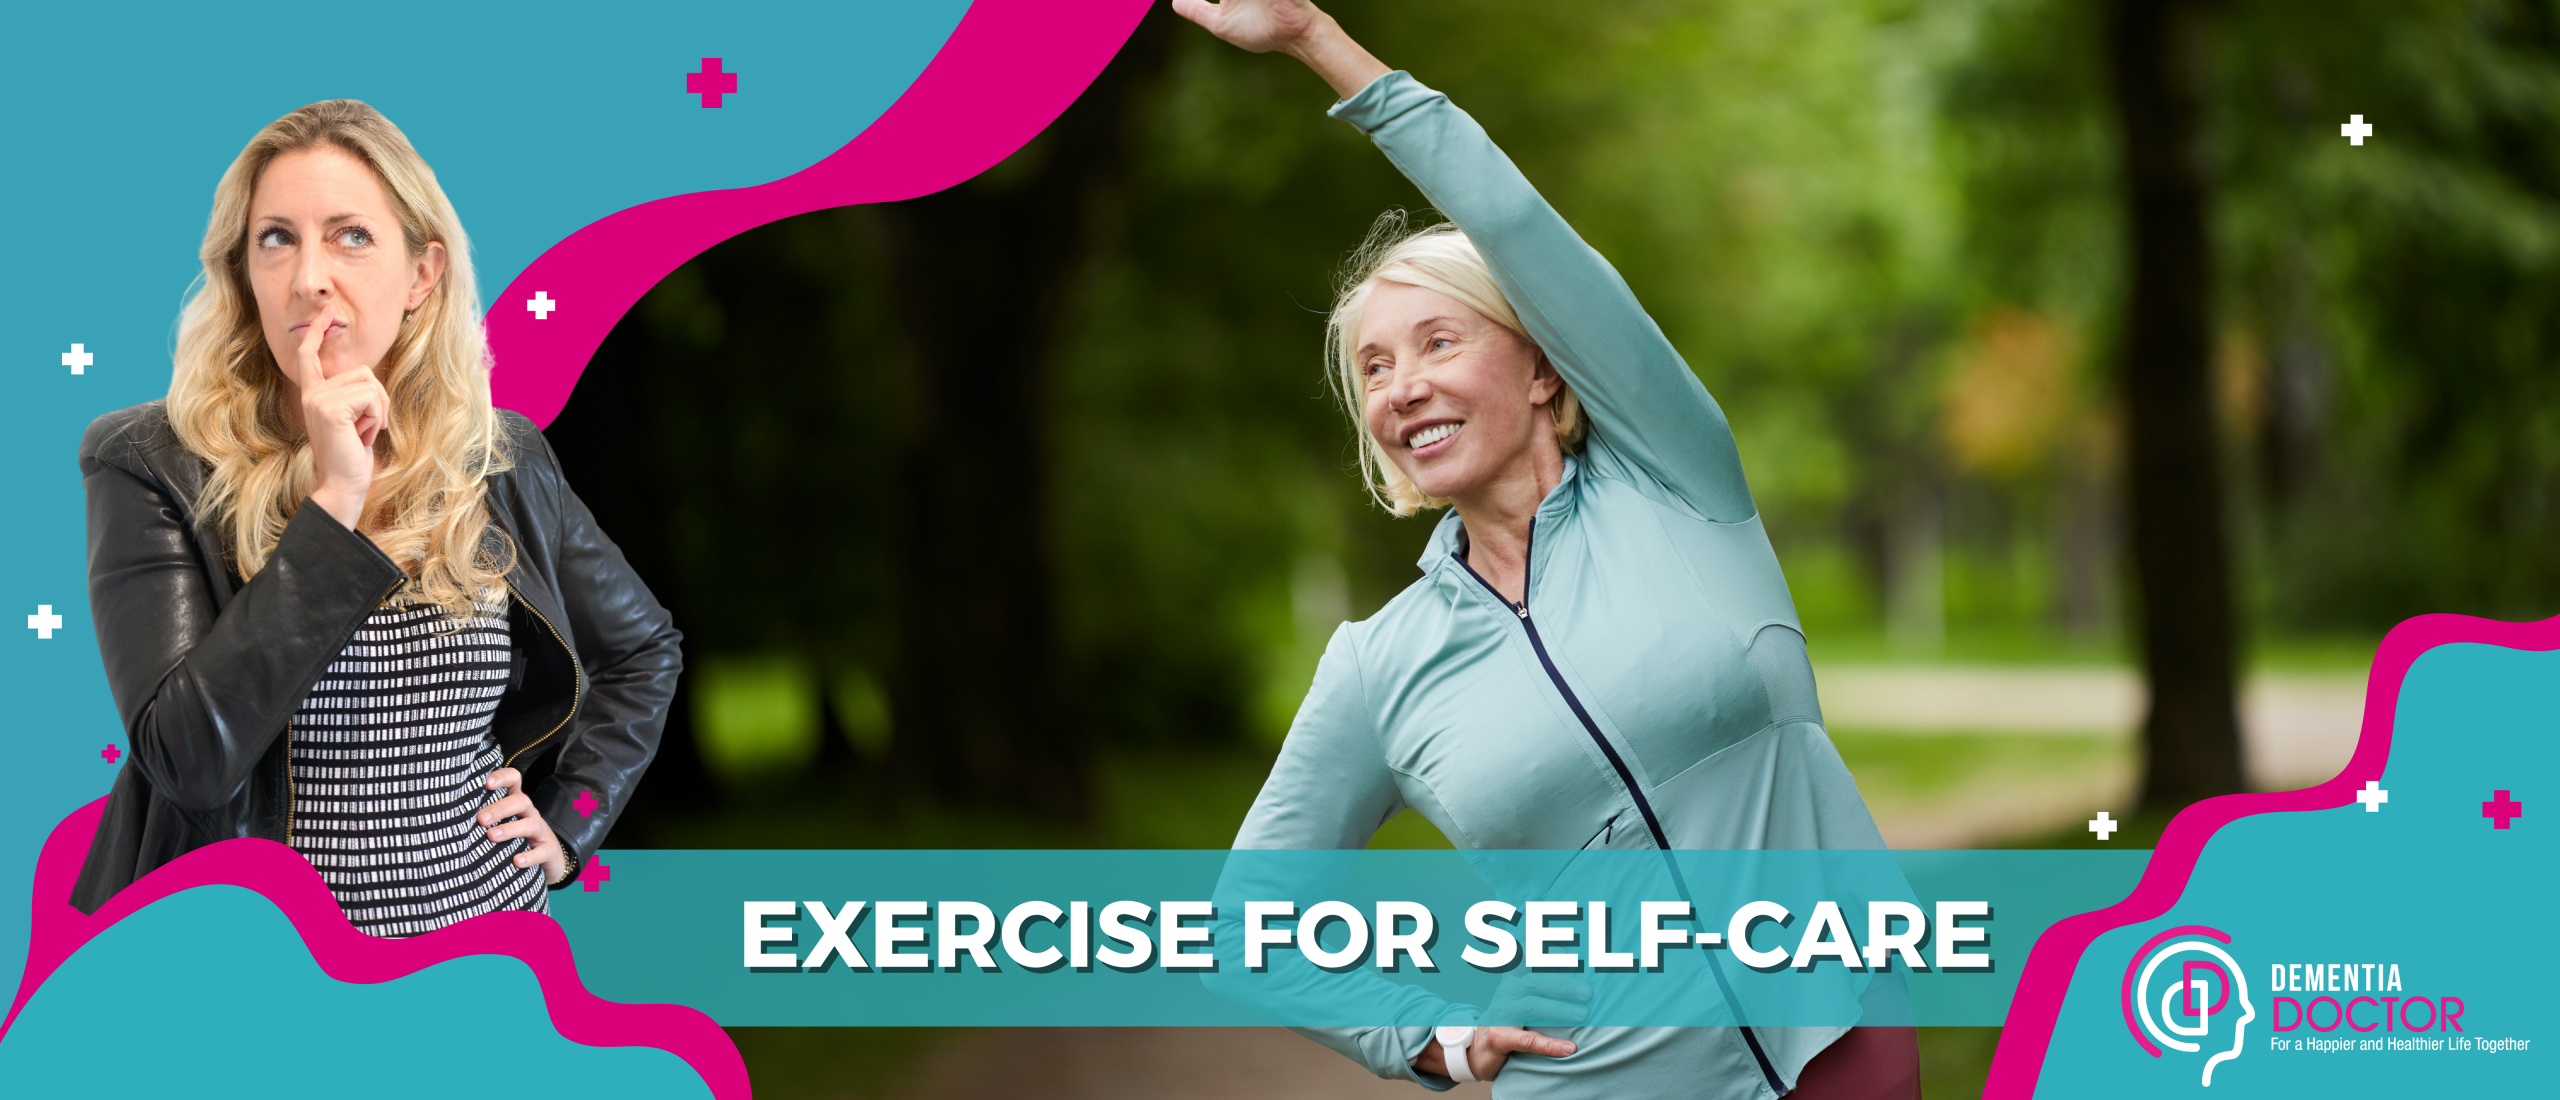 Exercising for self-care